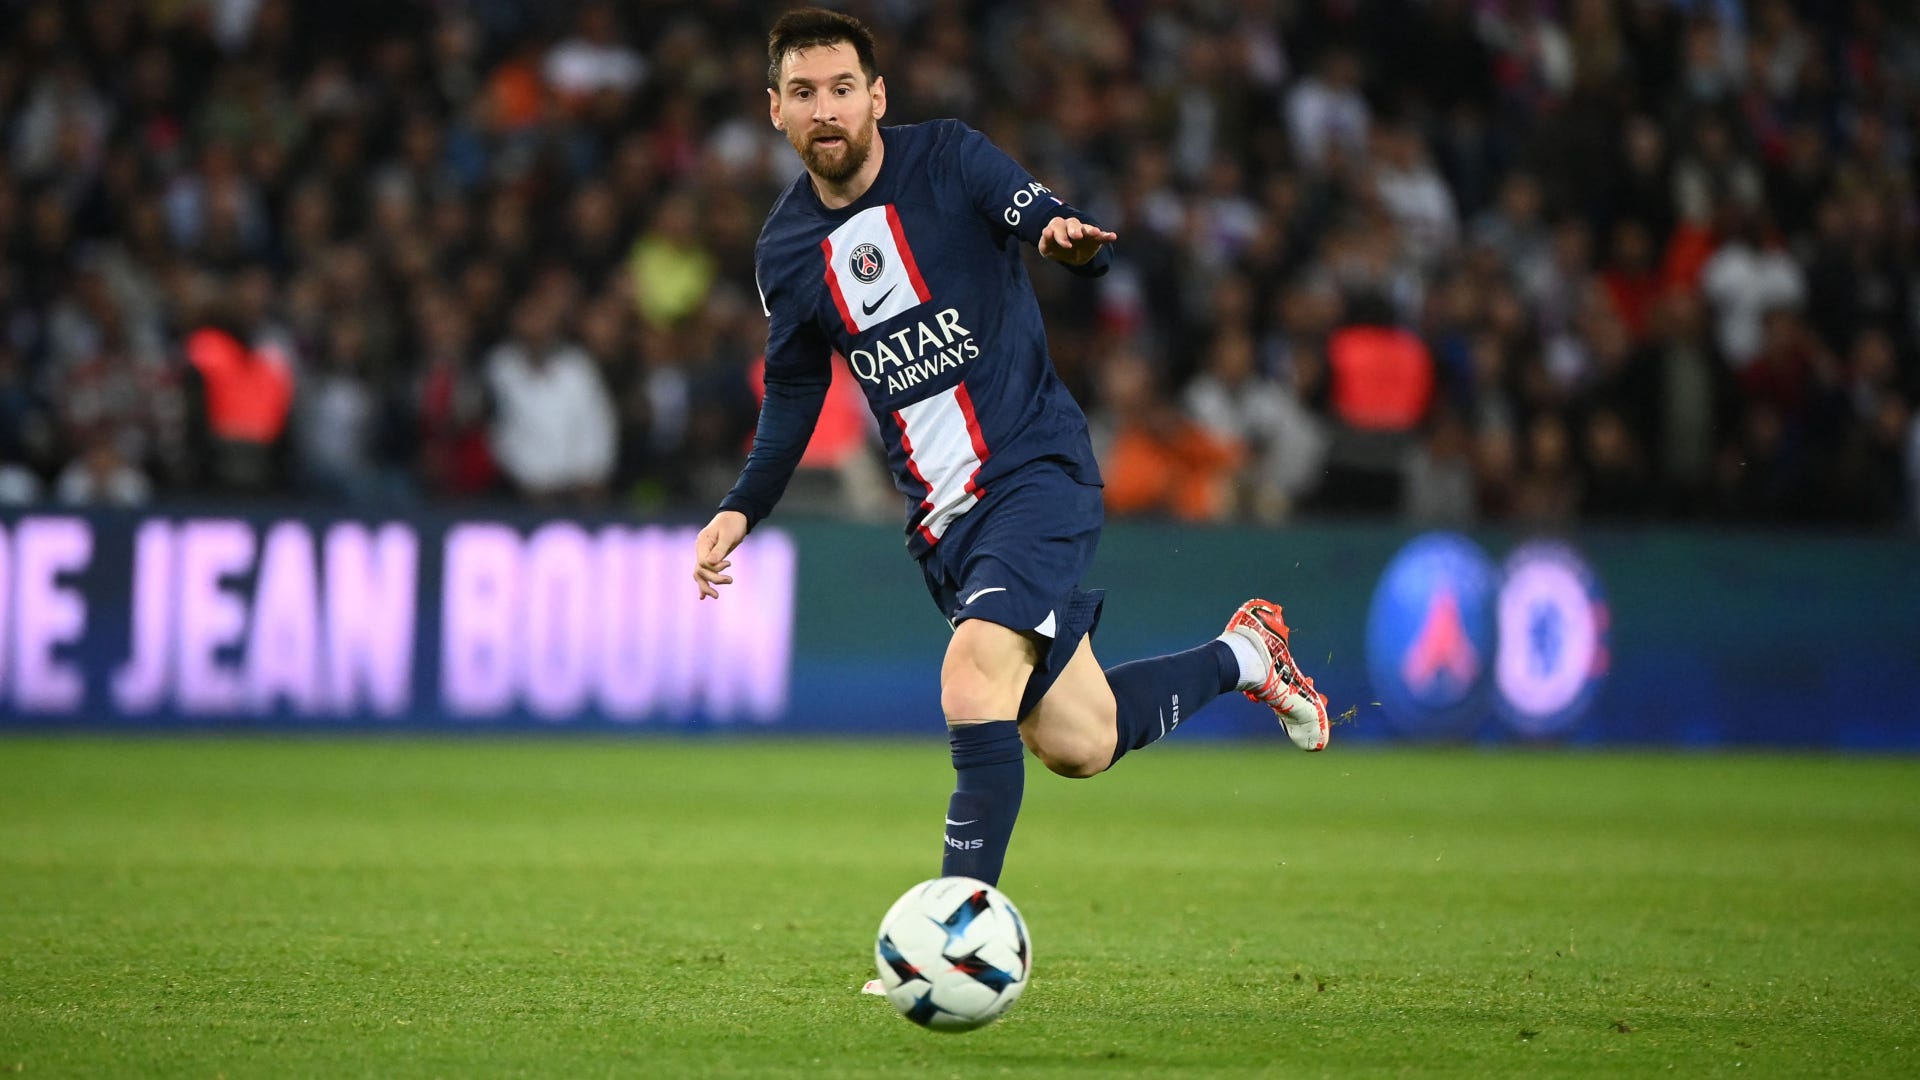 Lorient vs PSG Live stream, TV channel, kick-off time and where to watch Goal US